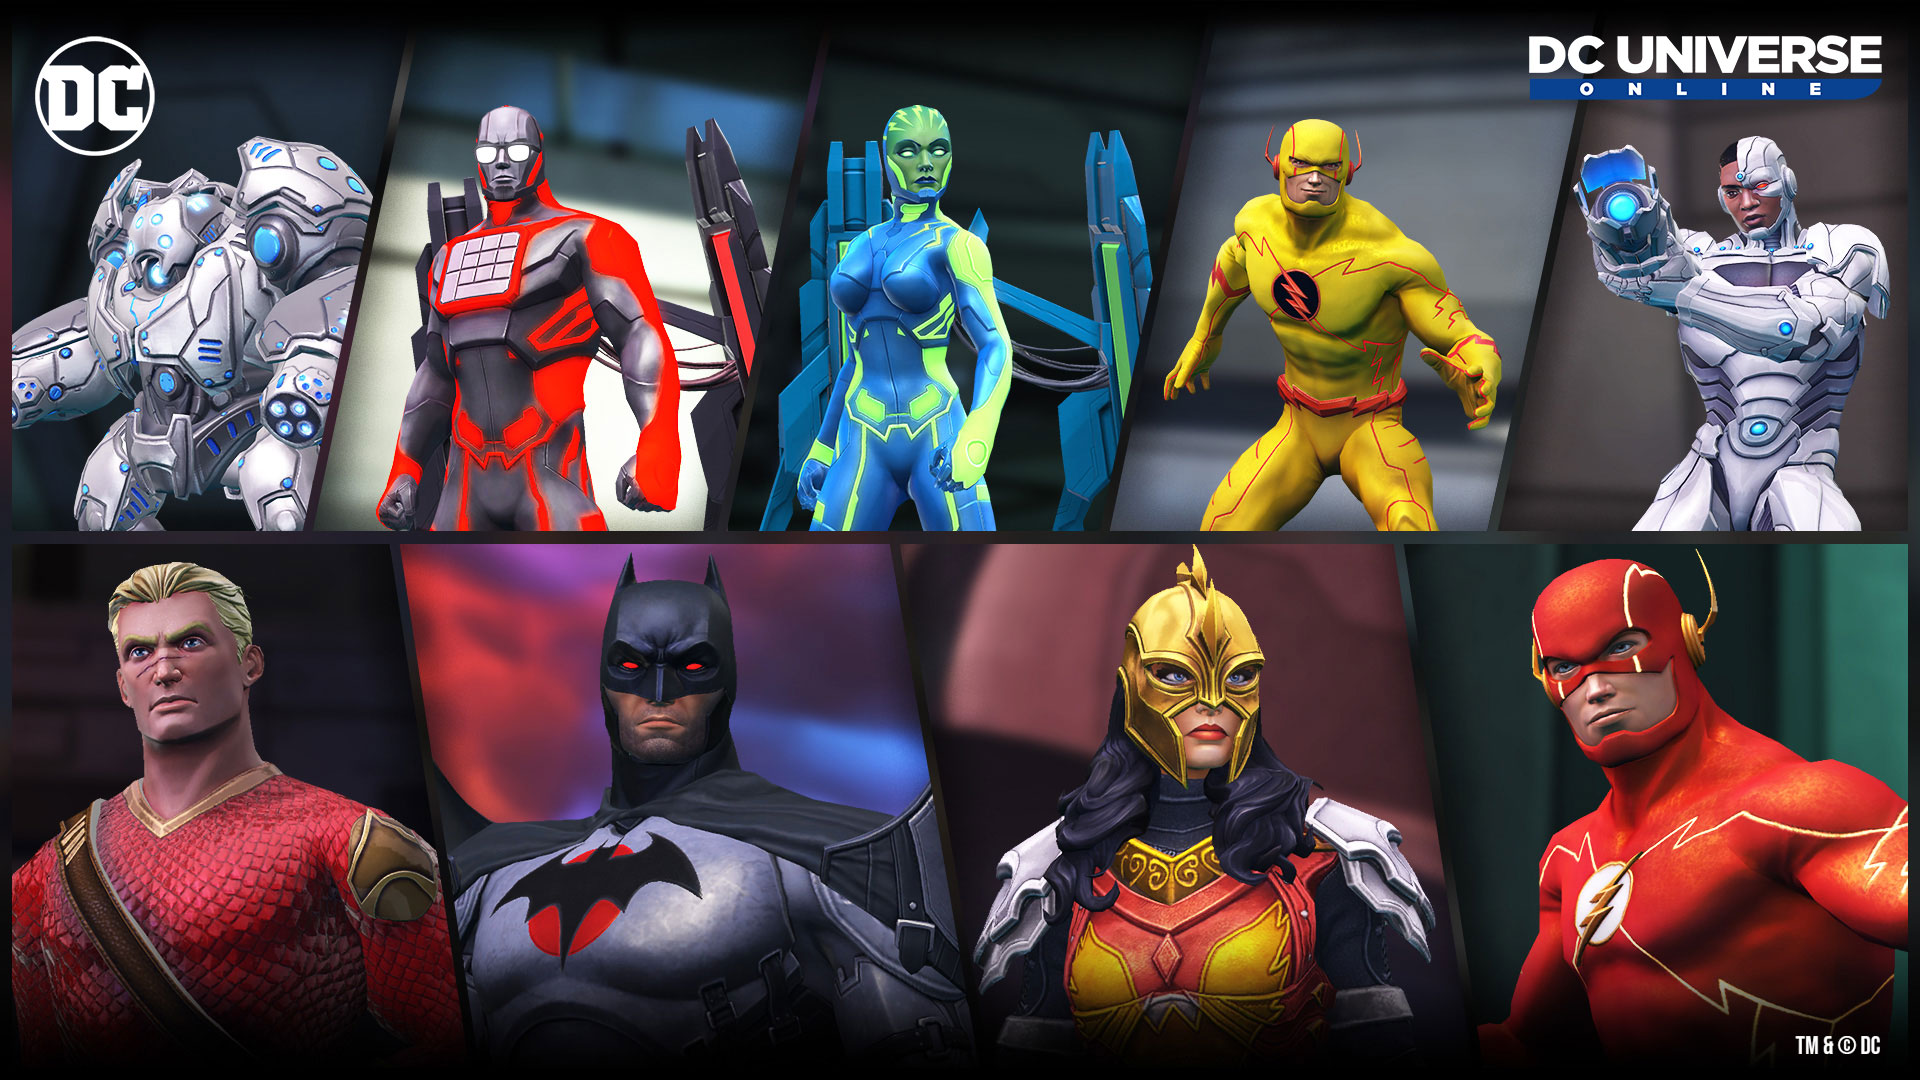 Anime like style's  DC Universe Online Forums